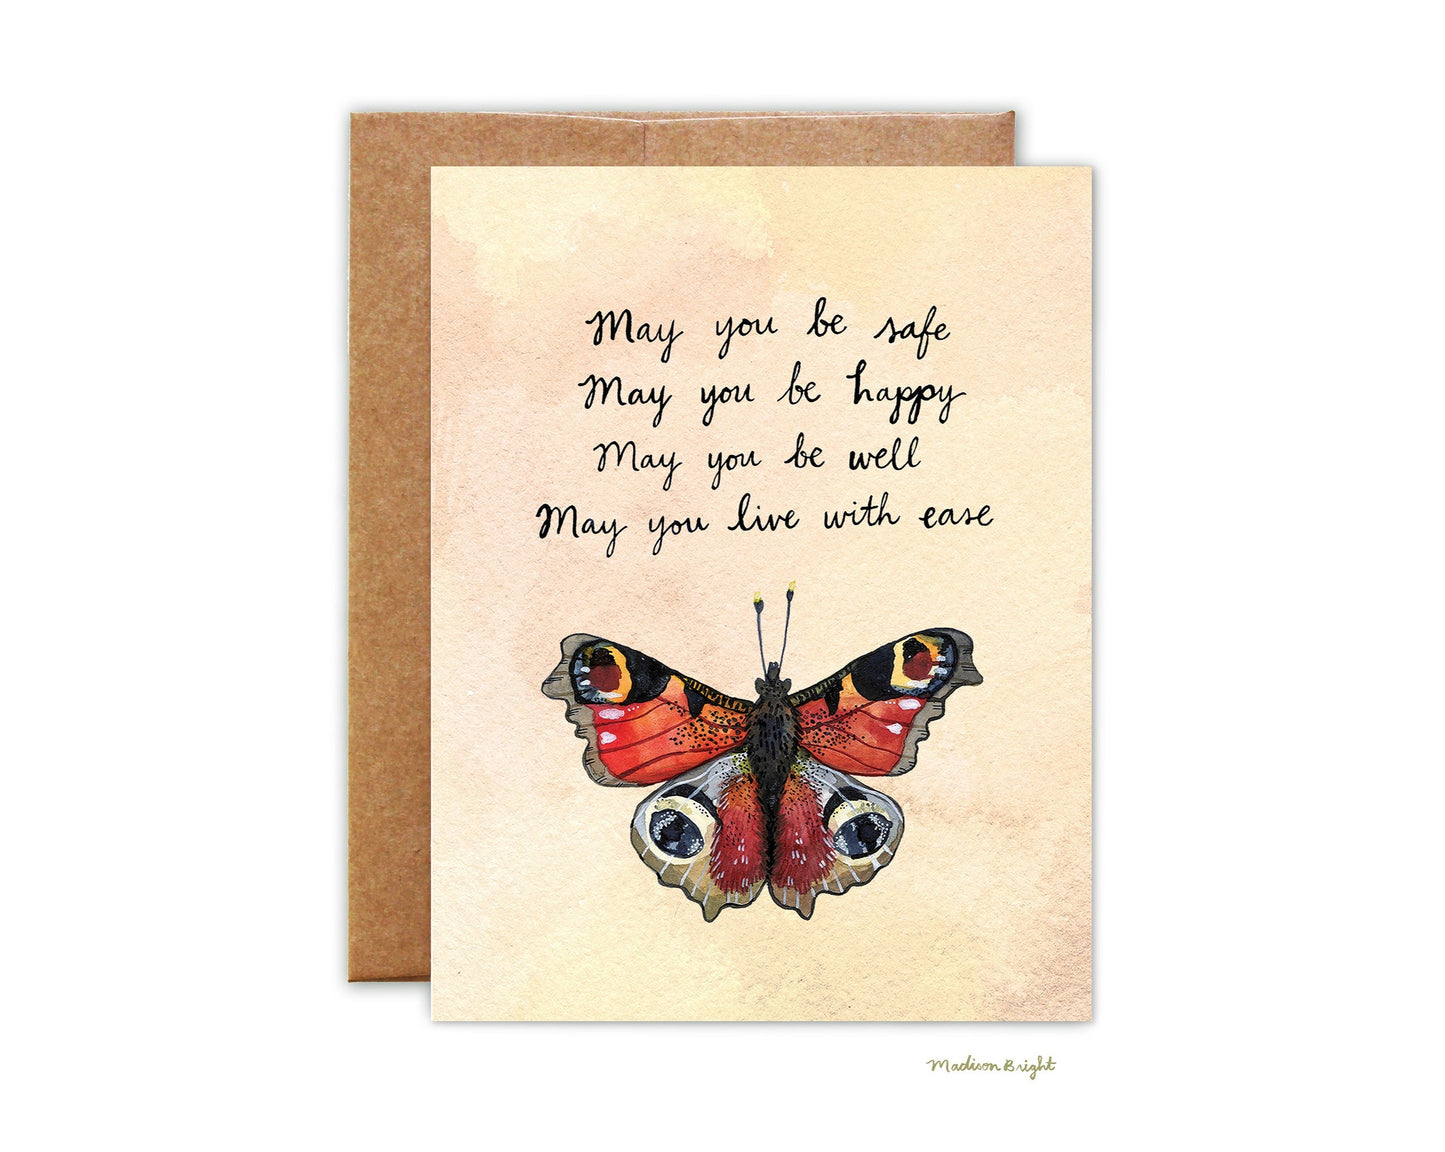 Lovingkindness Peacock Butterfly - Greeting Card